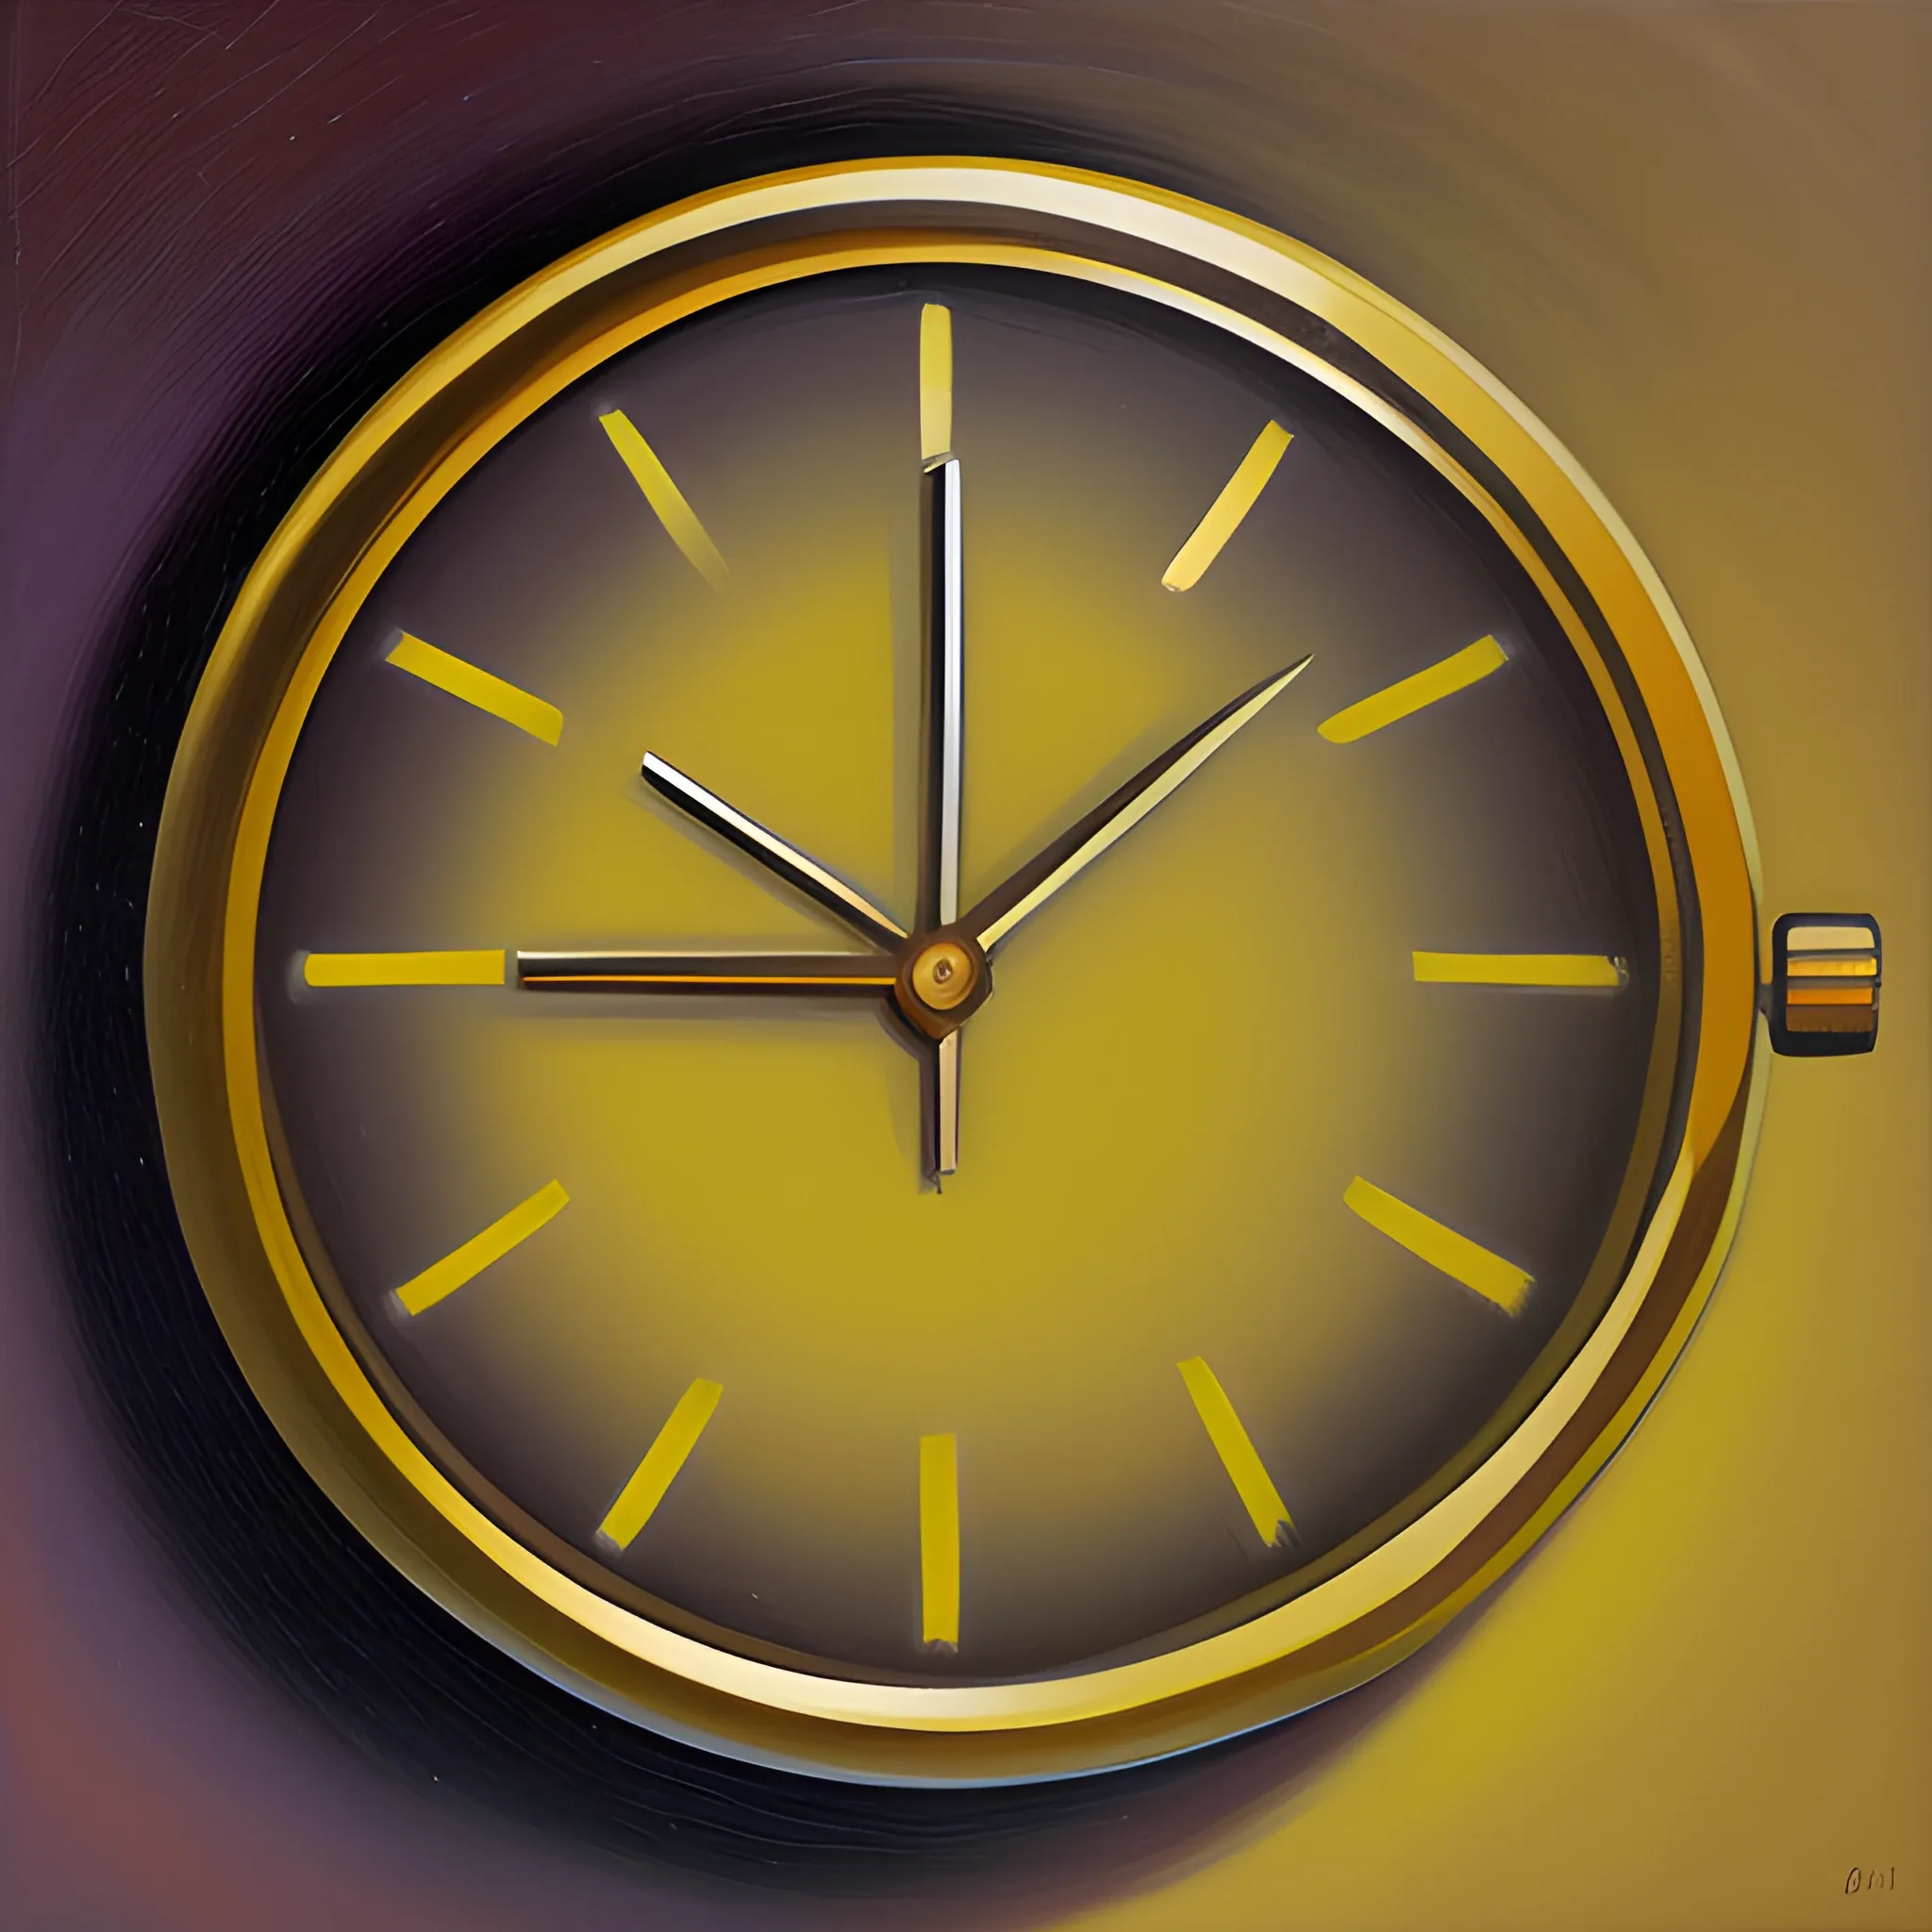 time icon
, Oil Painting